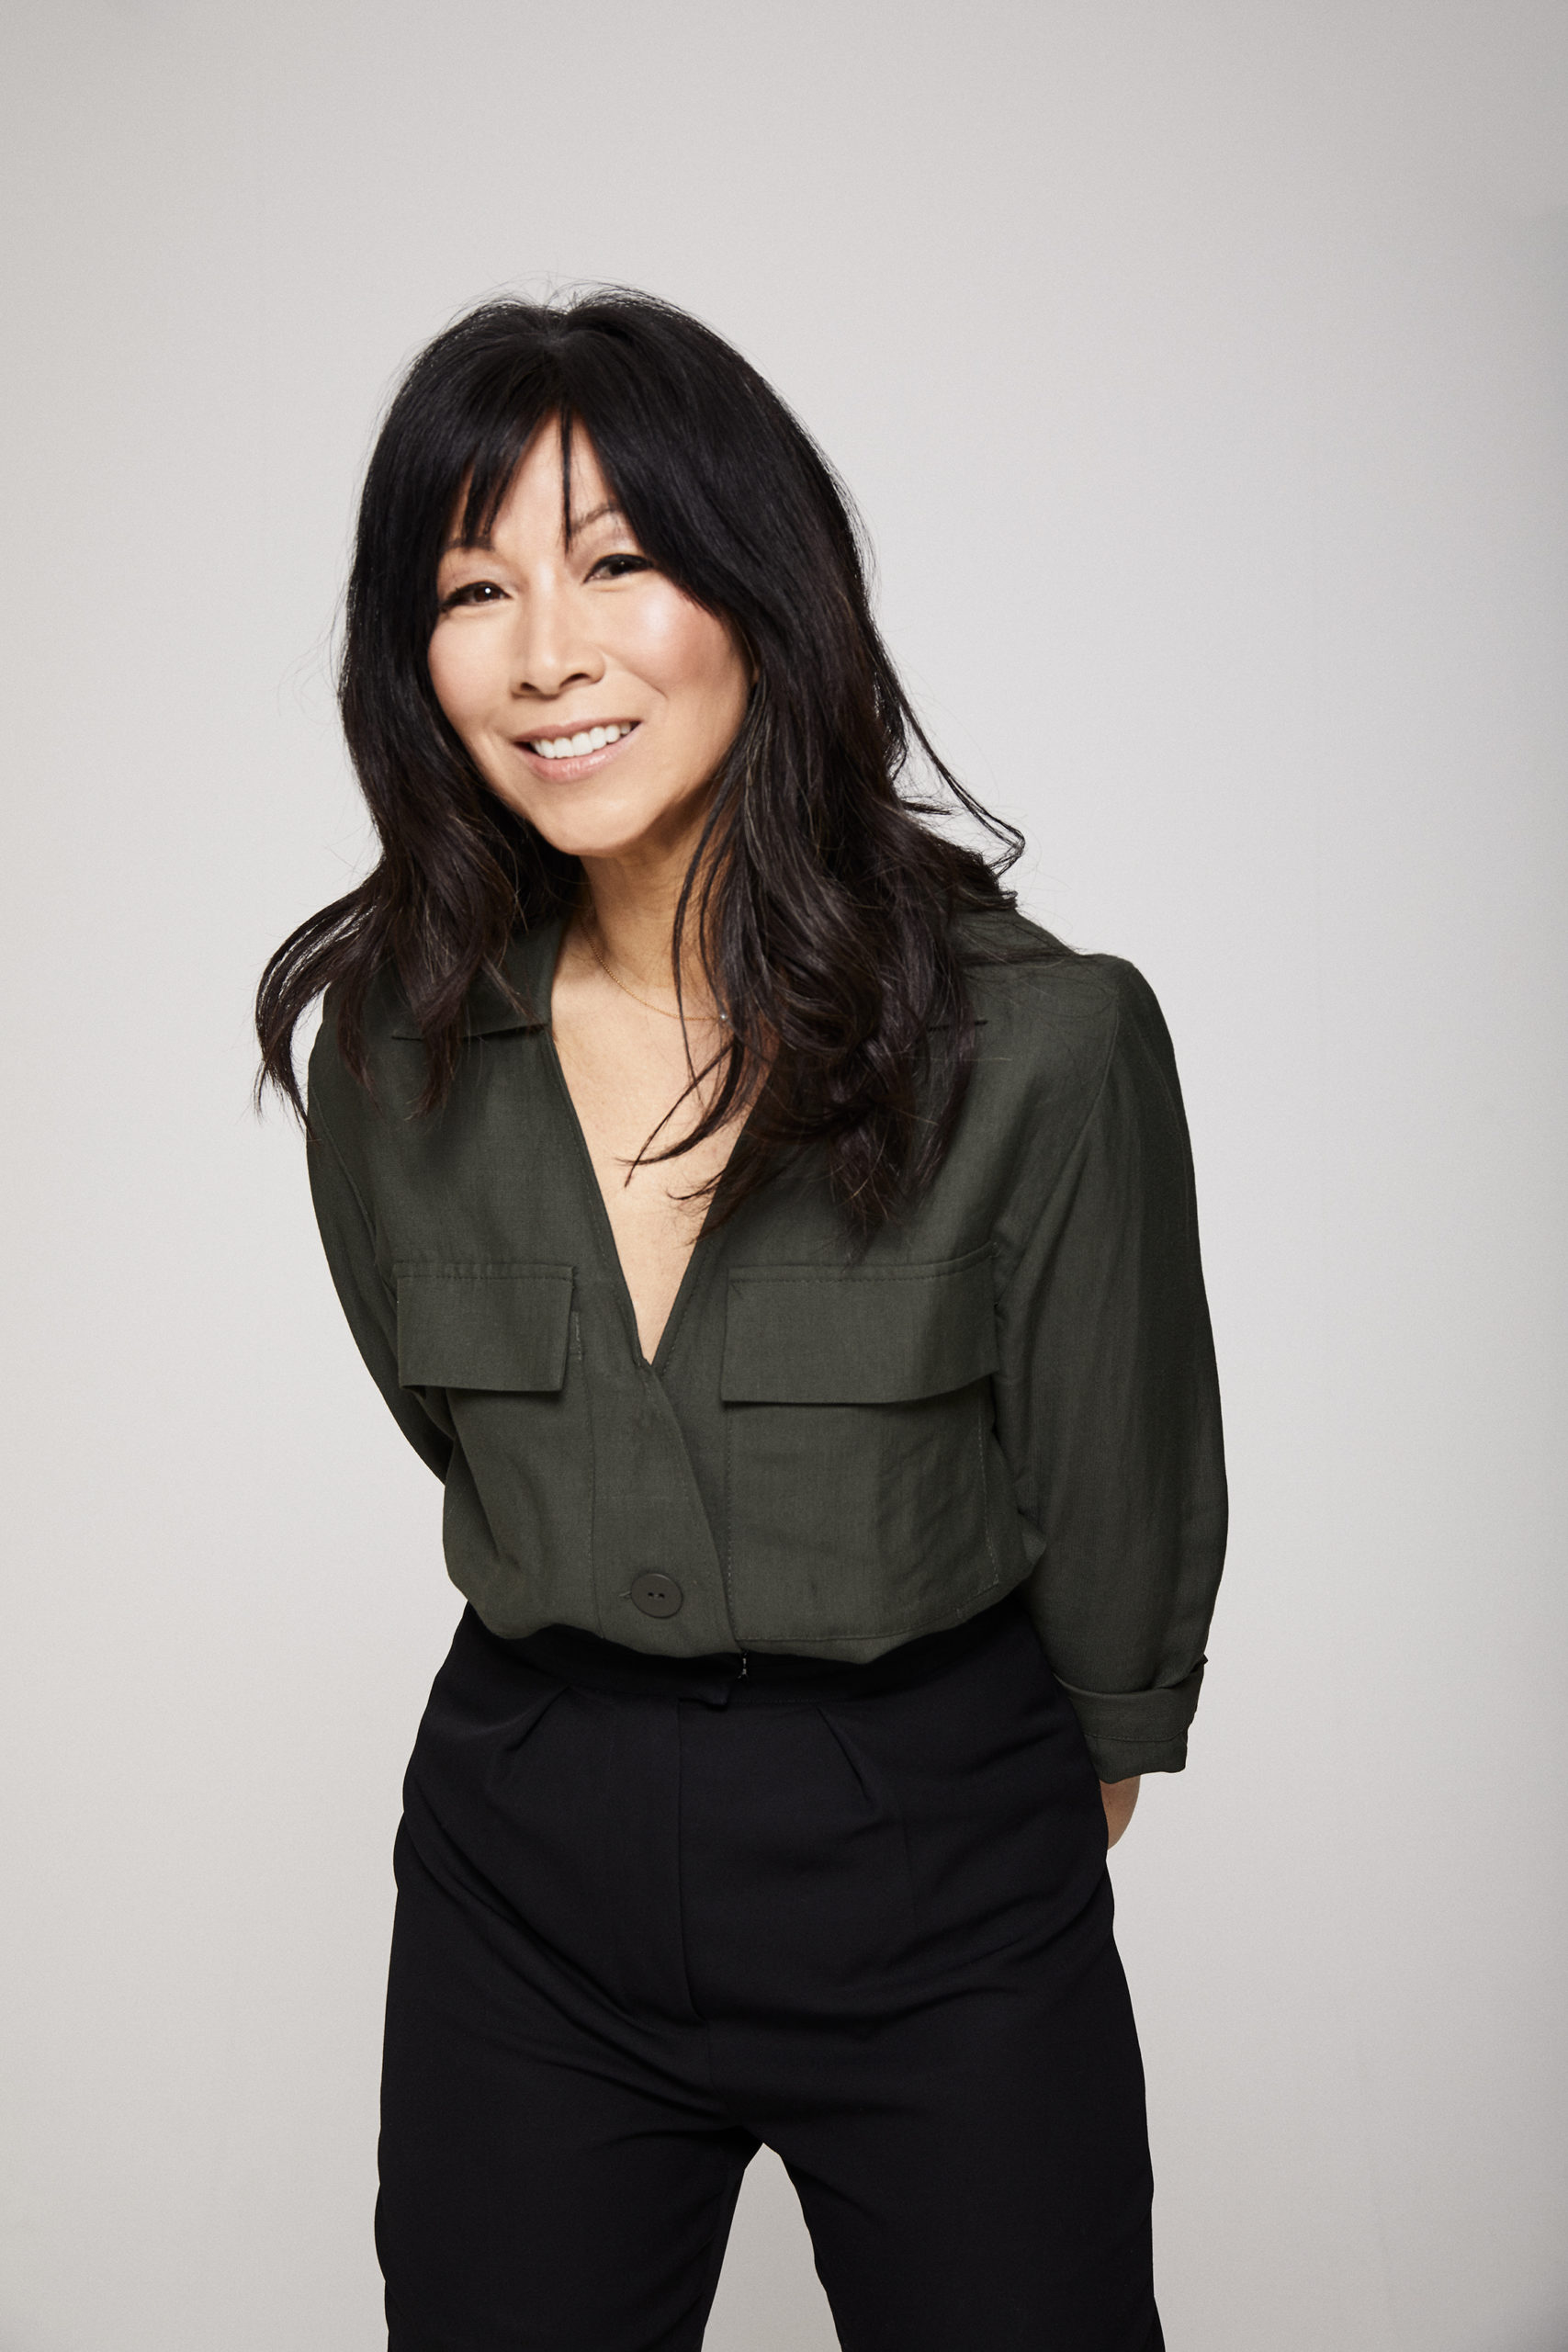 Sojin Lee, founder of TOSHI